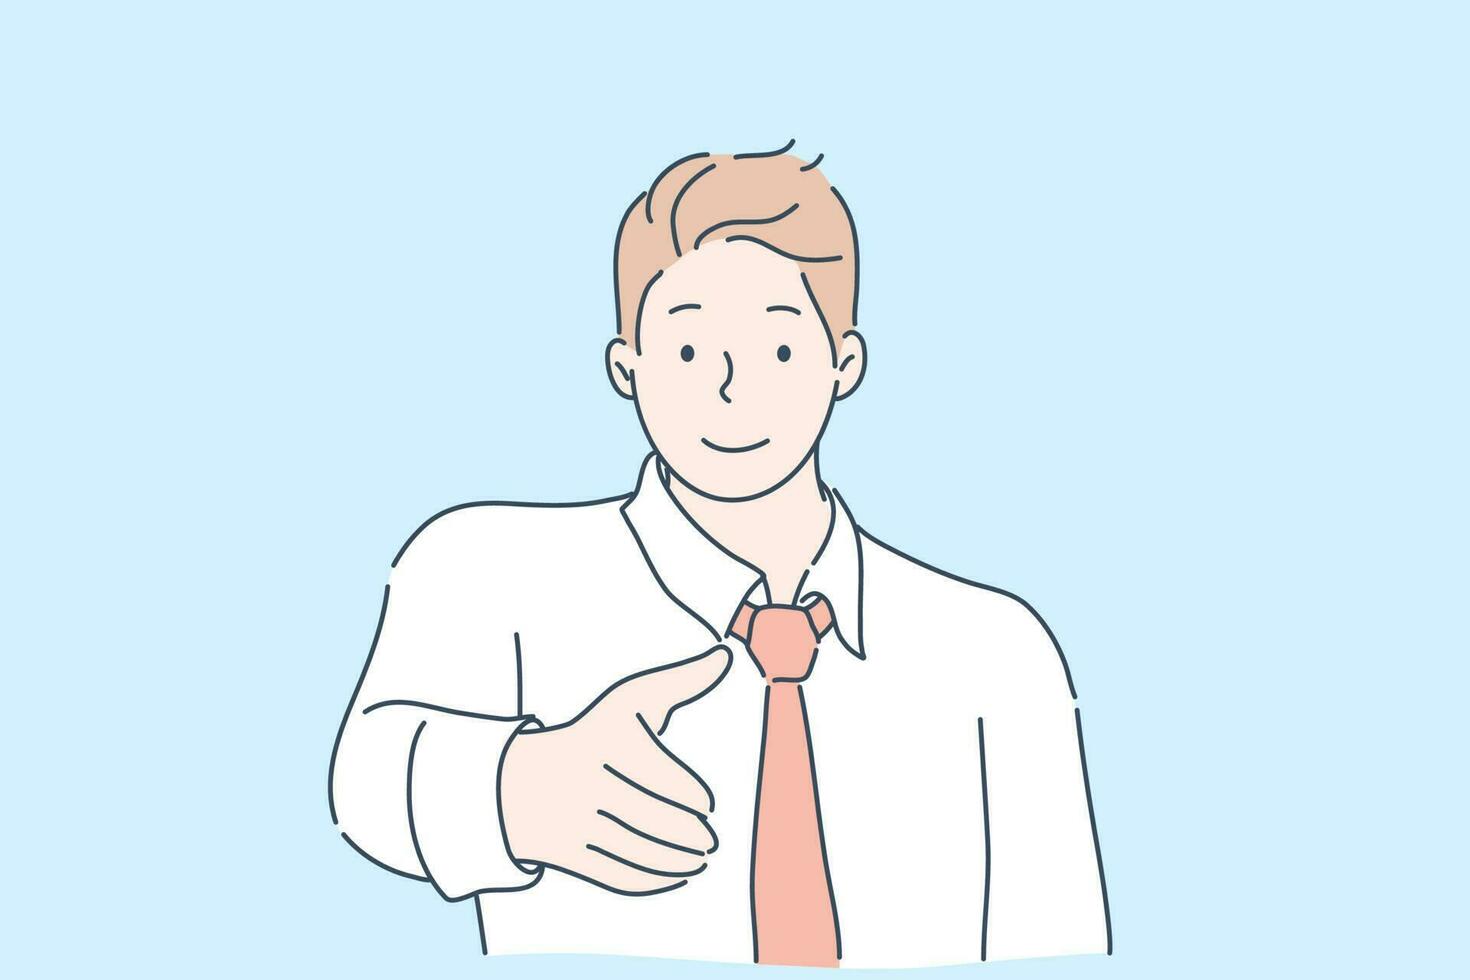 Meeting, greeting, business deal concept. Young smiling businessman, boy clerk manager boss reaches hand introduction. Making deal at meeting. Agreement. Greeting colleagues or partners. Acquaintance. vector